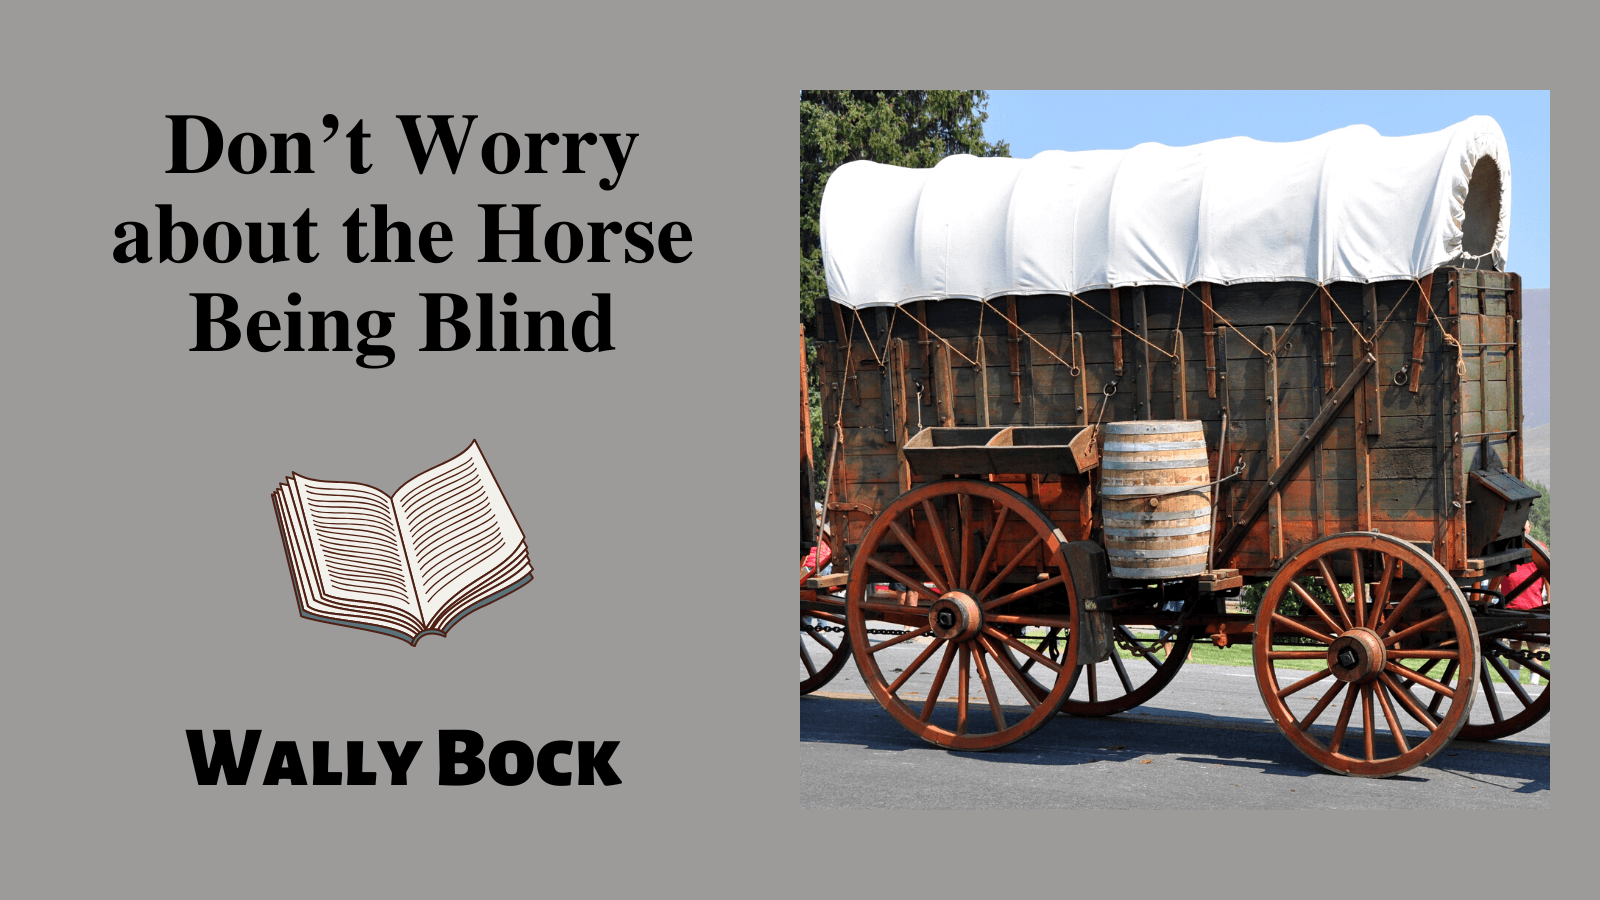 Don’t worry about the horse being blind